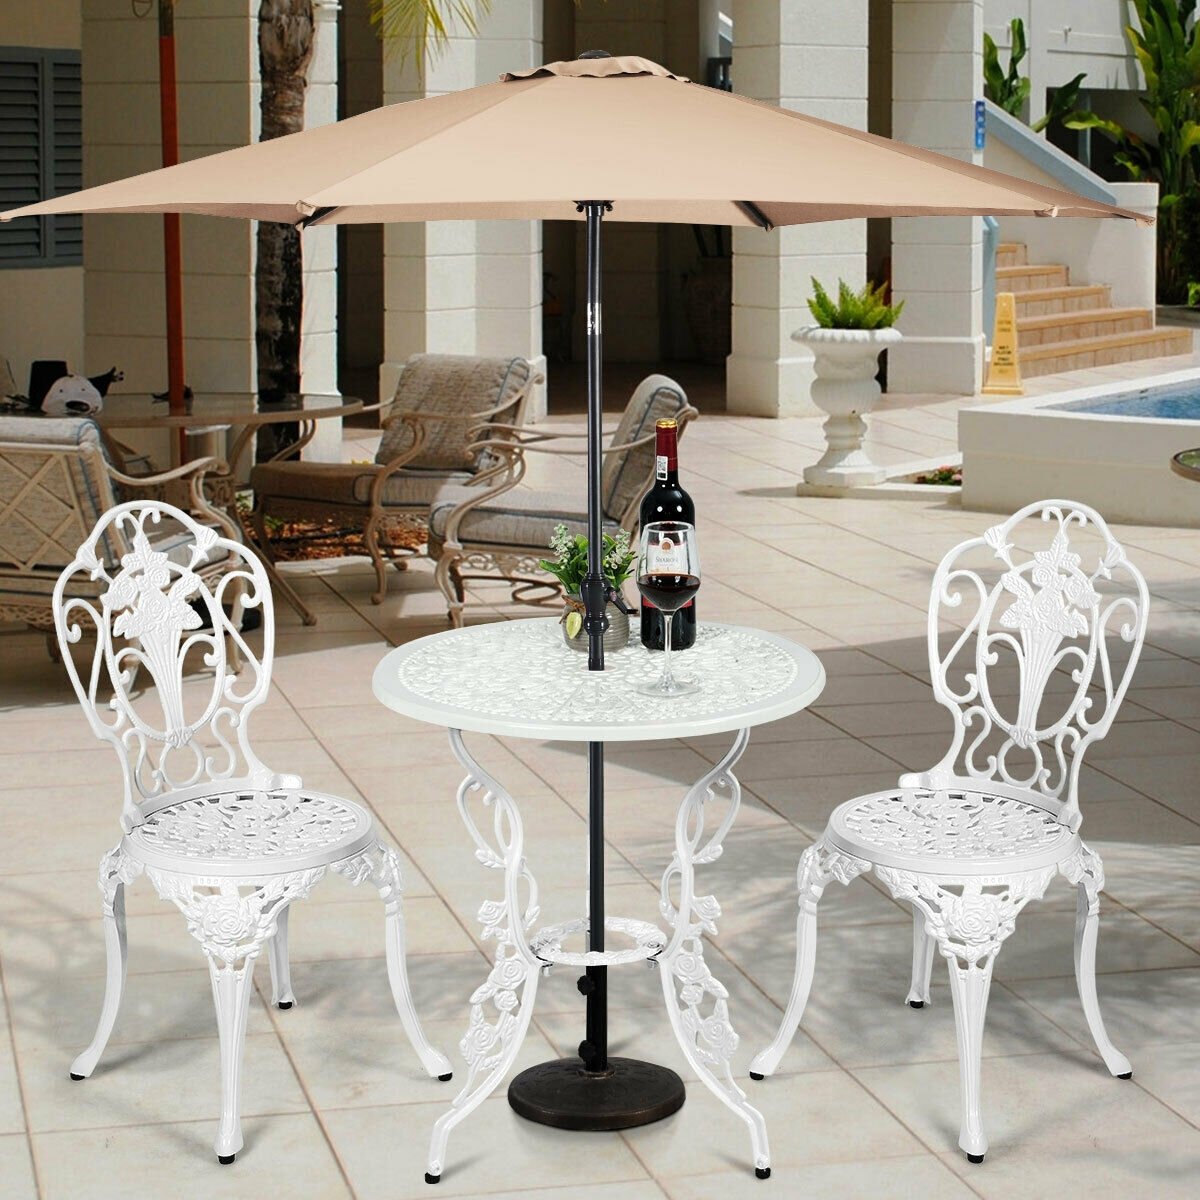 3 Pieces Patio Table Chairs Furniture Bistro Set , White - Gallery Canada